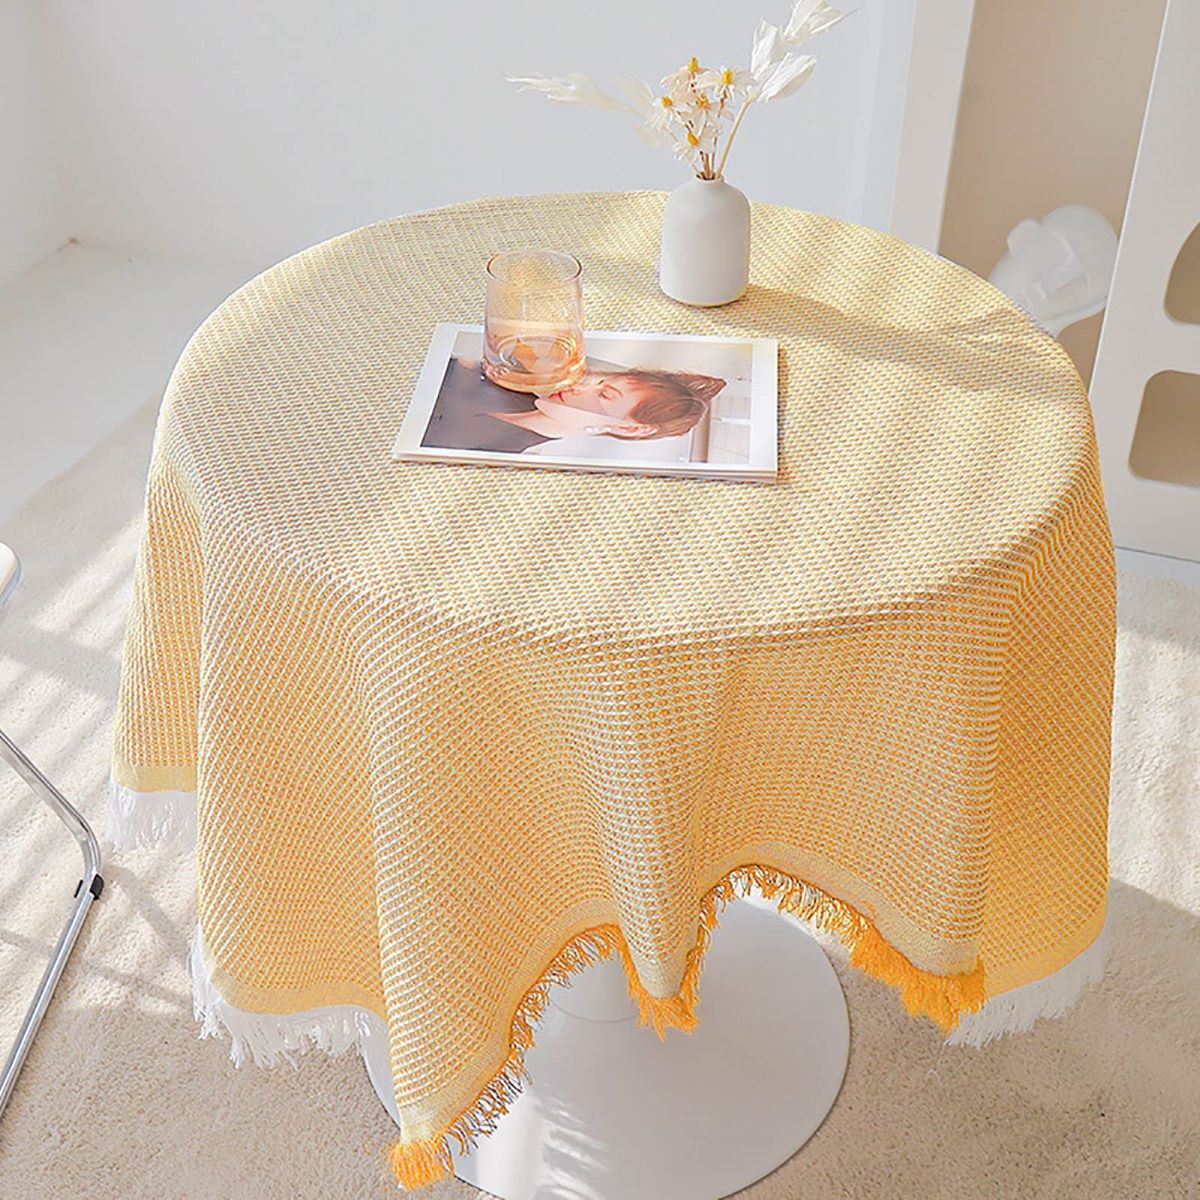 How To Store Round Tablecloths Without Wrinkling